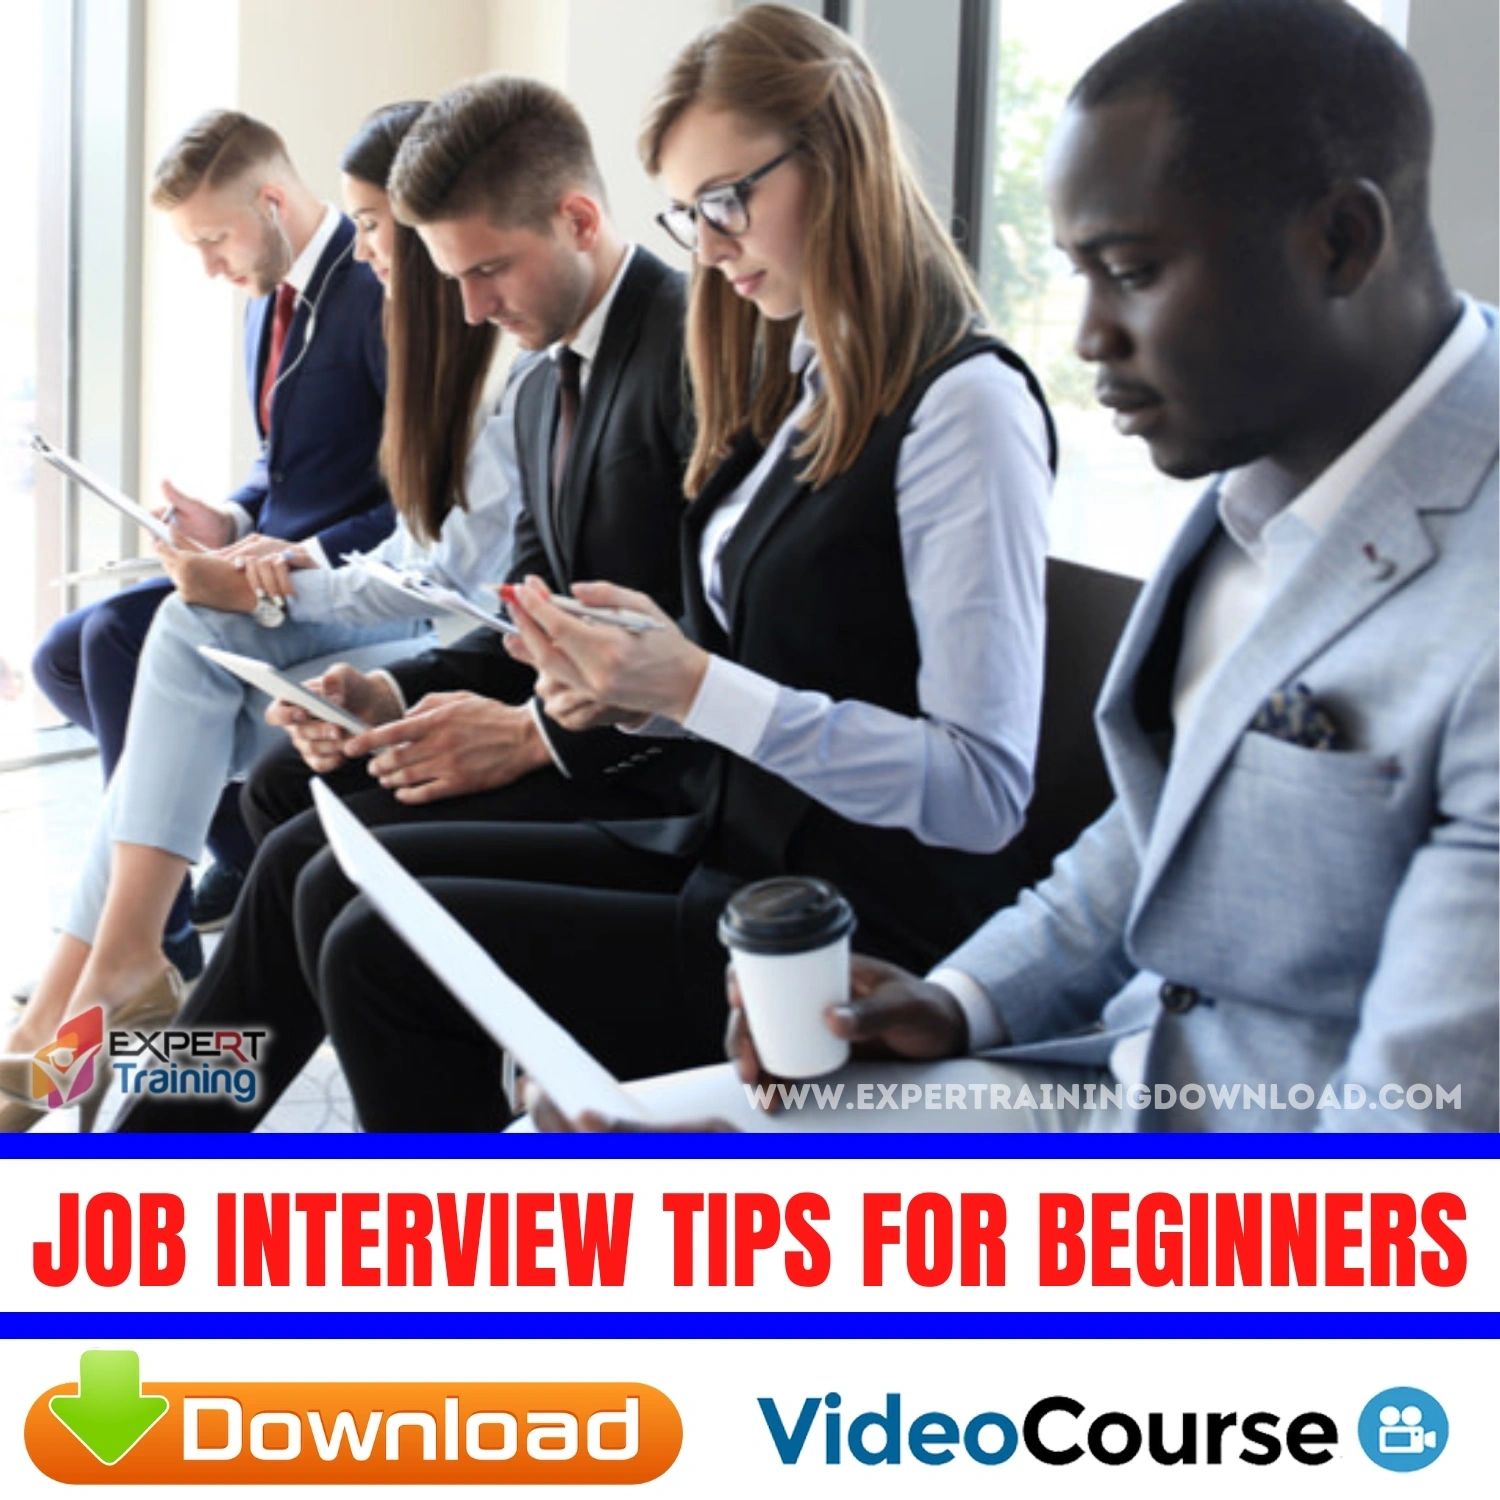 Job Interview Tips for Beginners